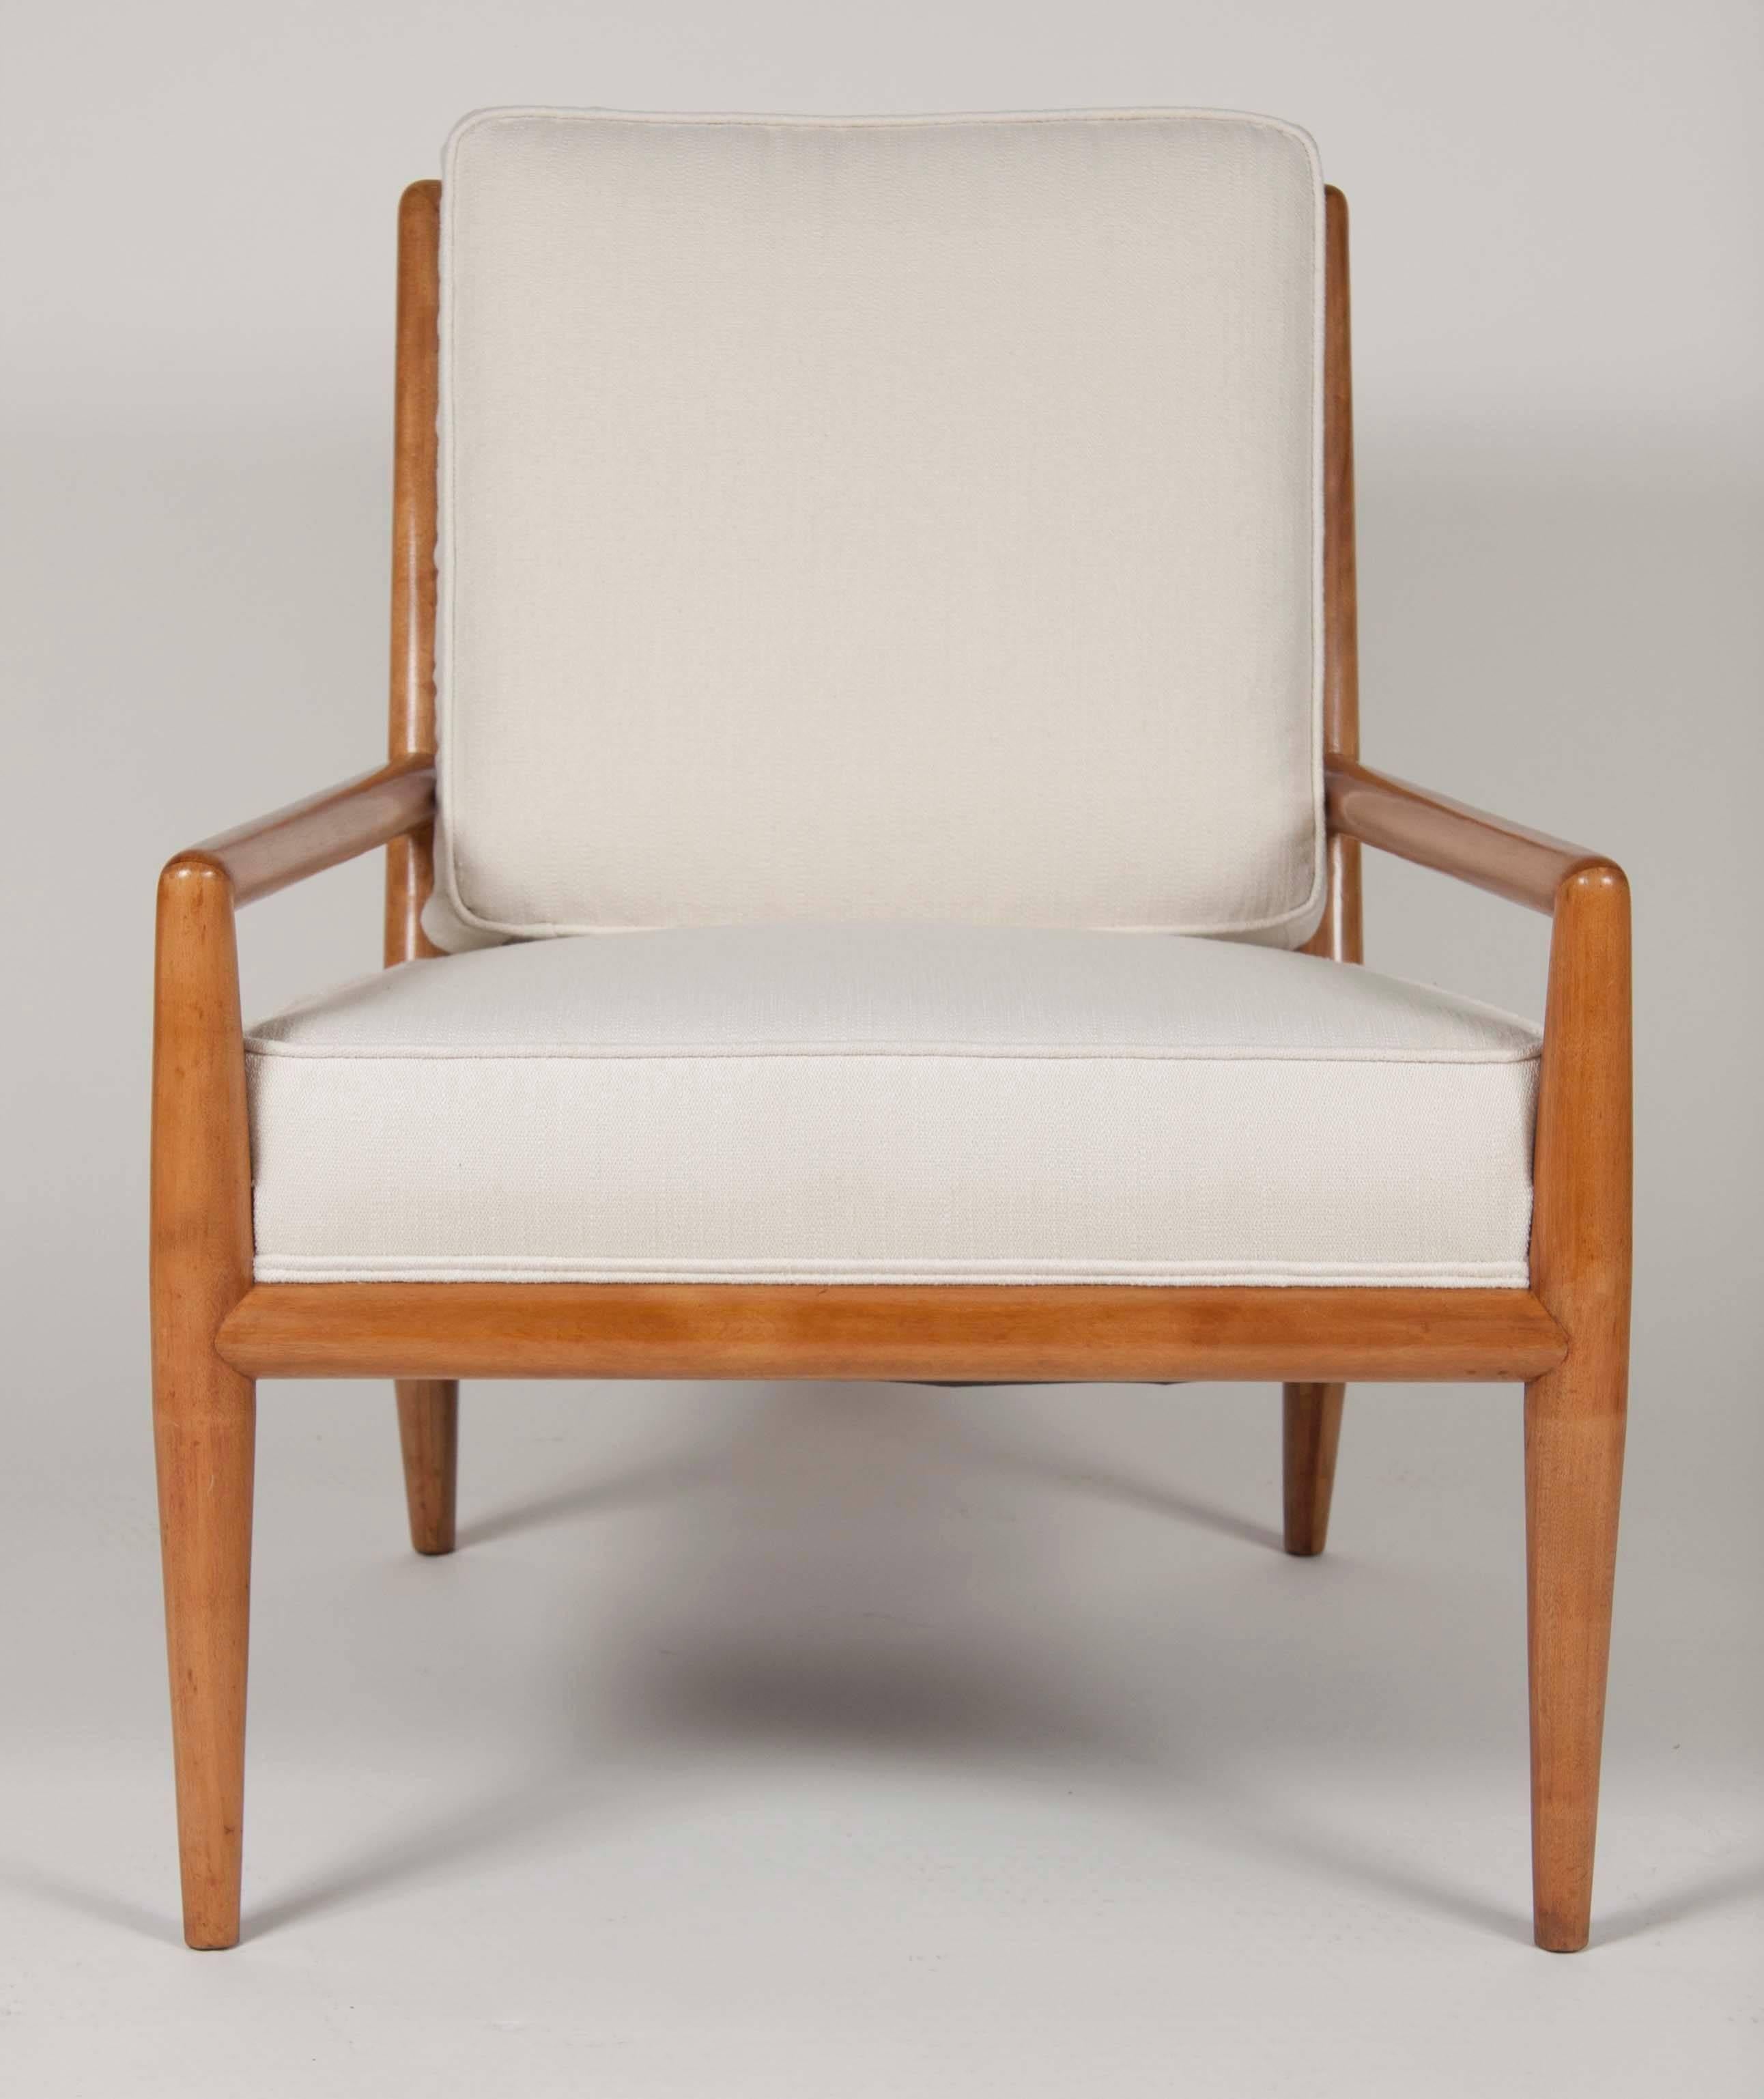 A Mid-Century American maple frame, upholstered lounge chair by T.H. Robsjohn-Gibbings
(1905-1976).